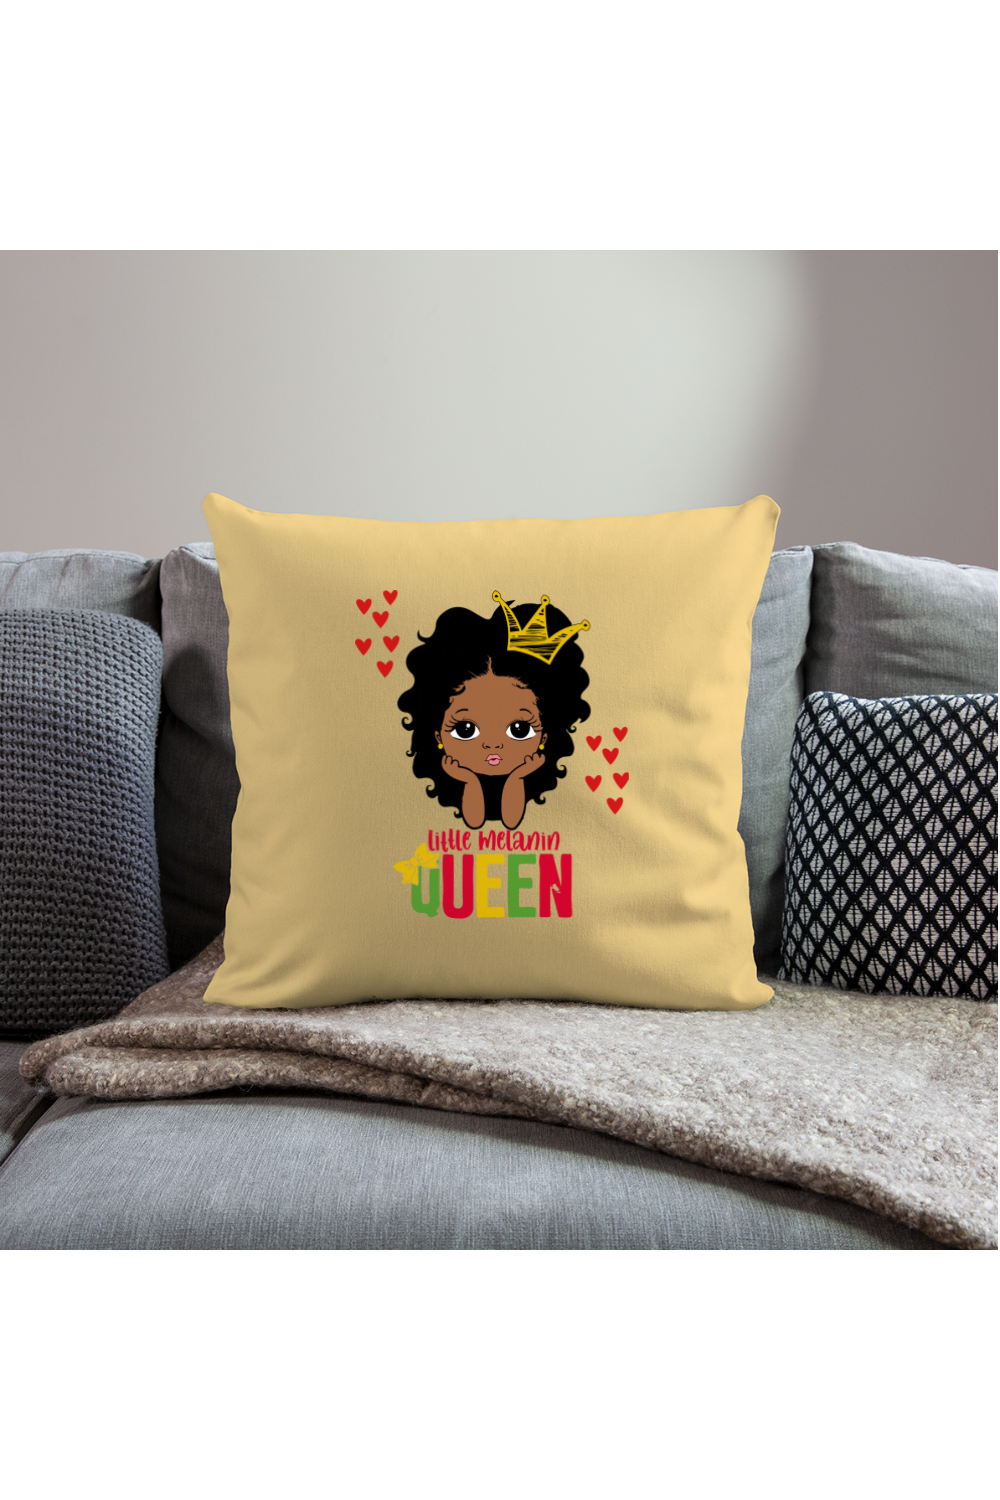 Little Melanin Queen Throw Pillow Cover 18” x 18” - washed yellow